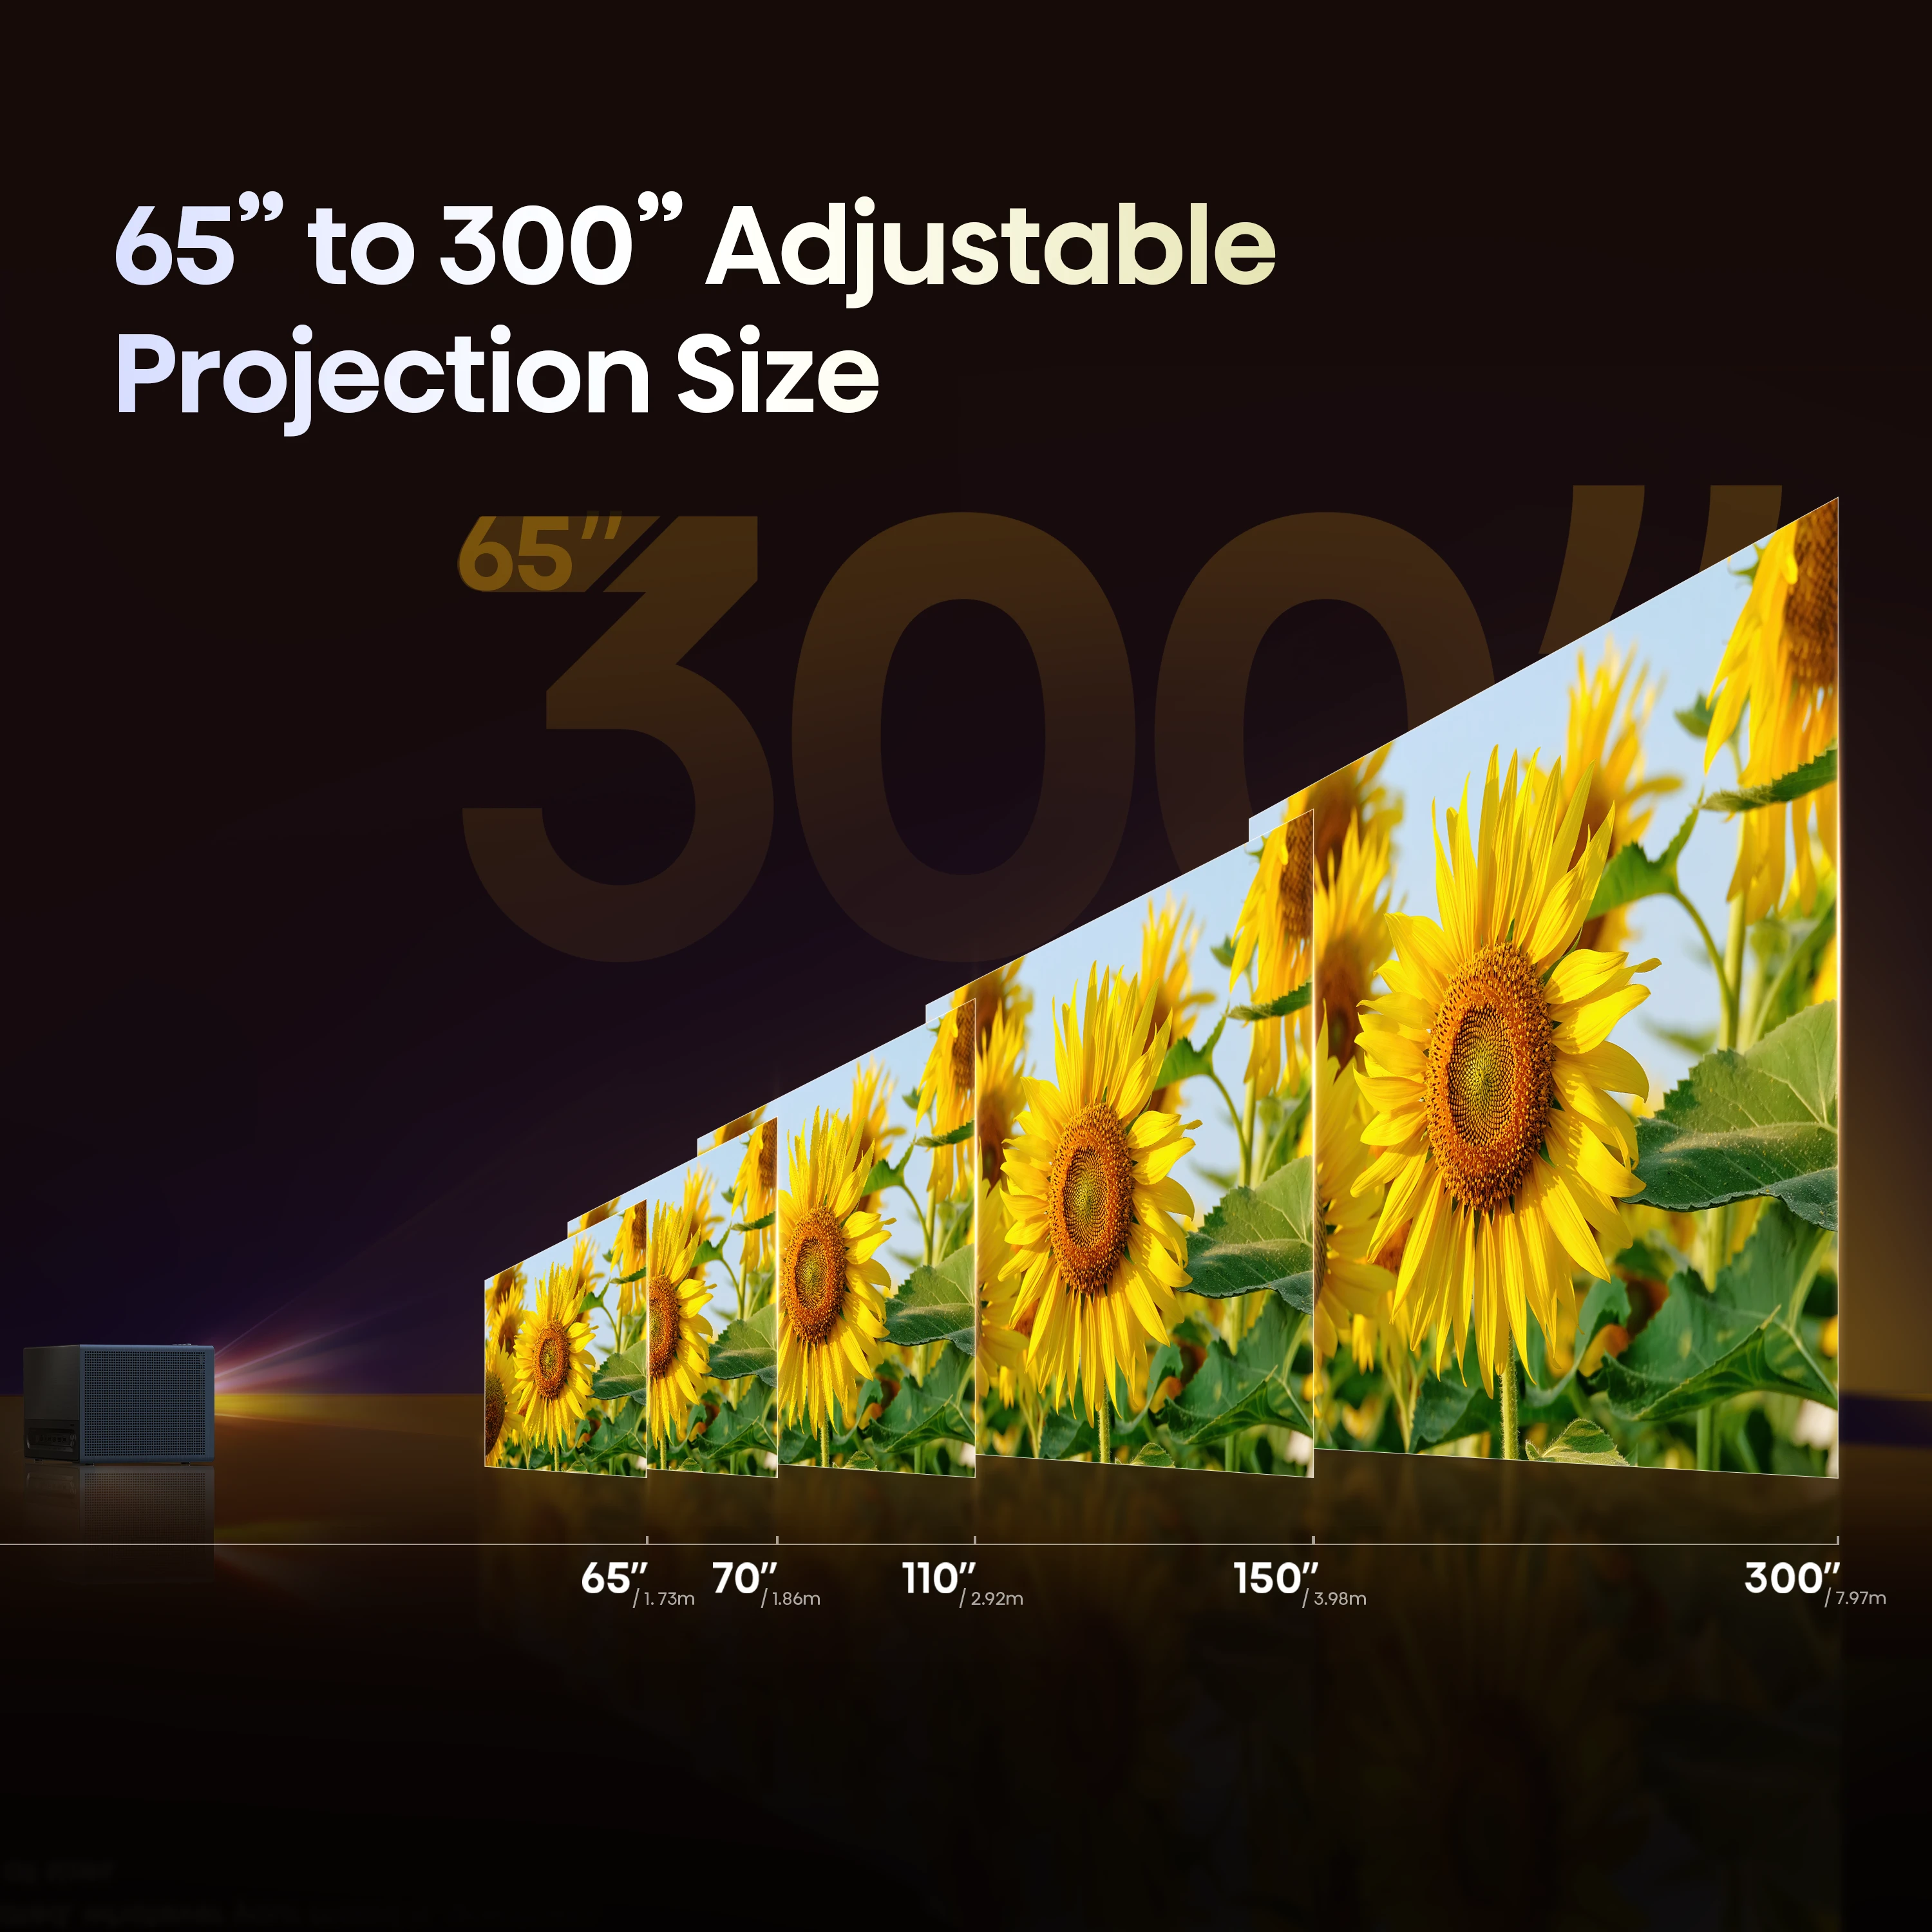 C1-2-65-300 Adjustable Projection Size.png